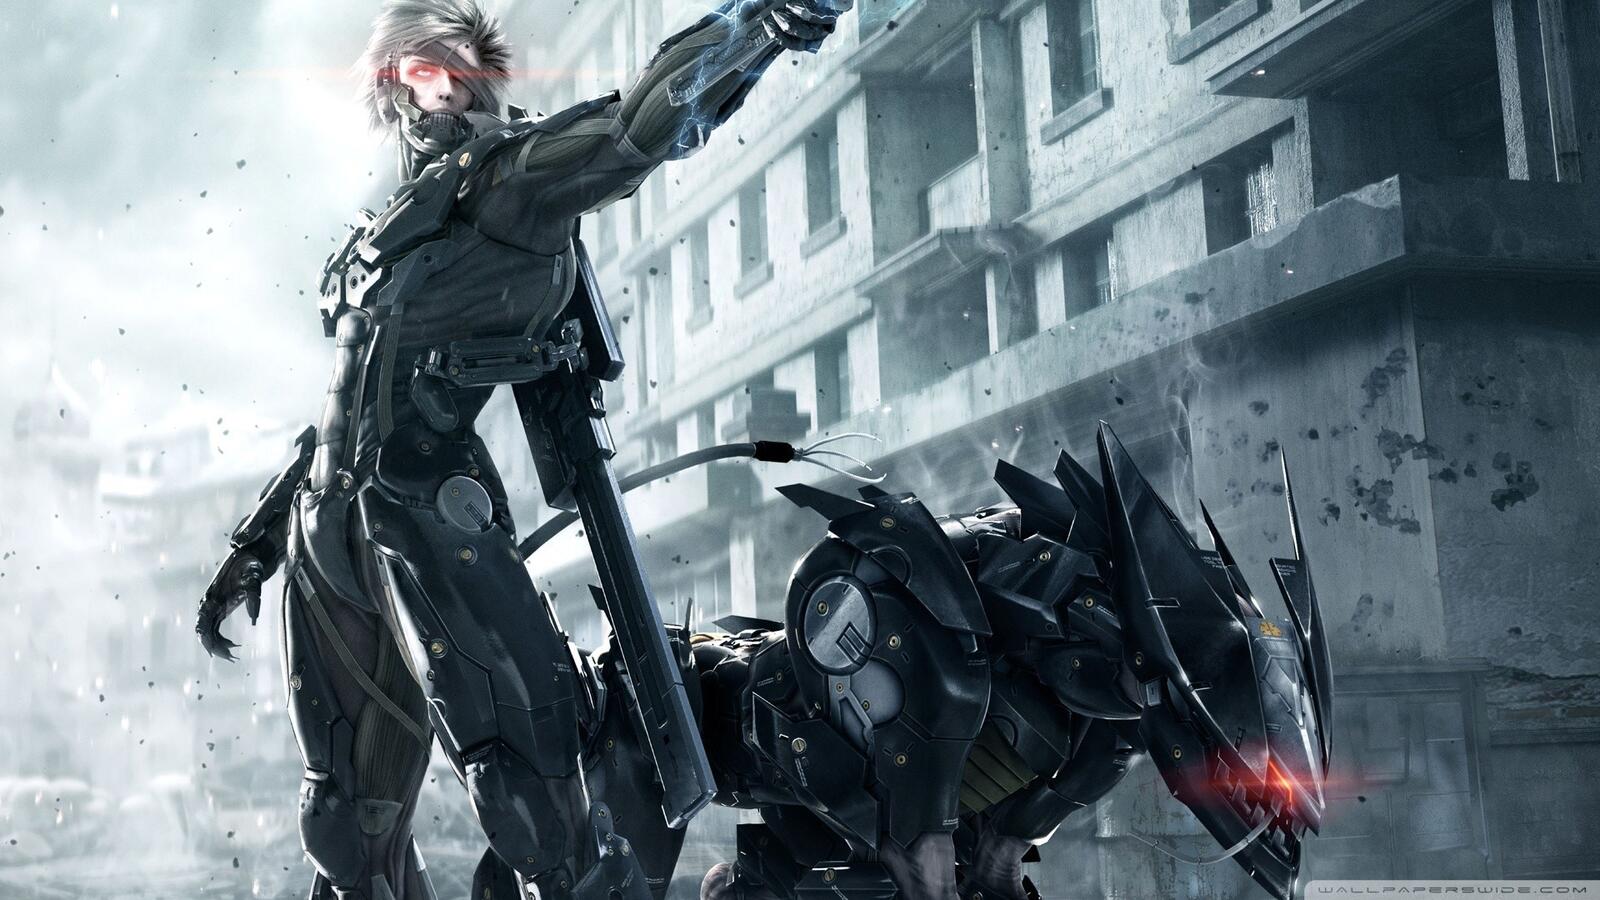 Free photo A picture from the game Metal Gear Rising Revengeance